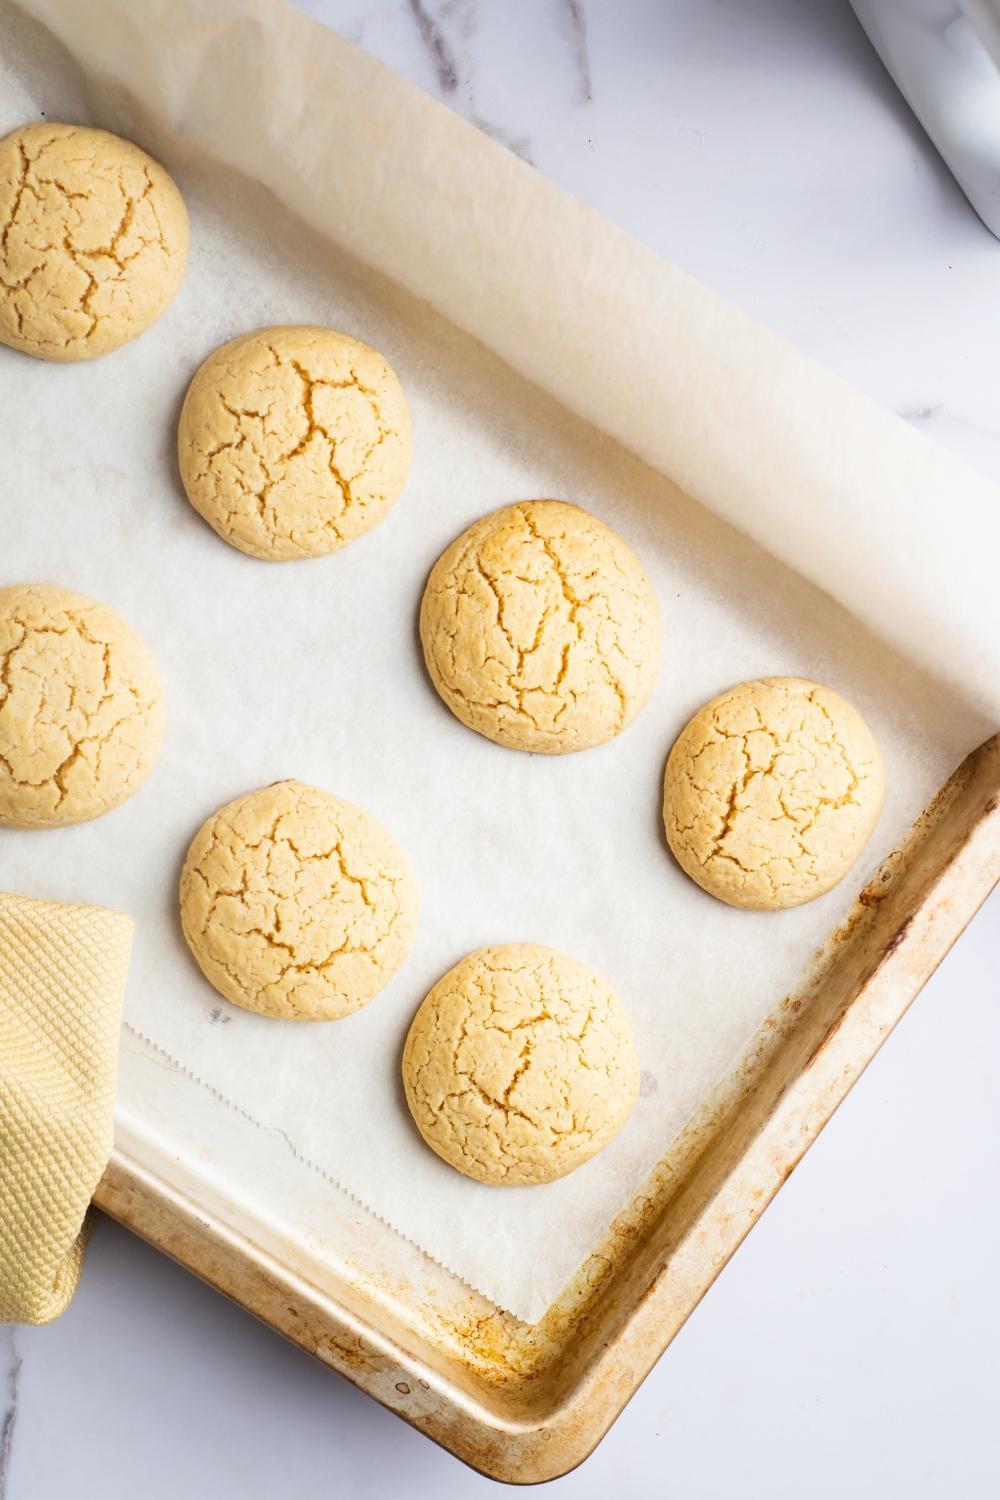 An overhead view of a baking sheet lined with parchment paper there are eight baked sugar cookies on